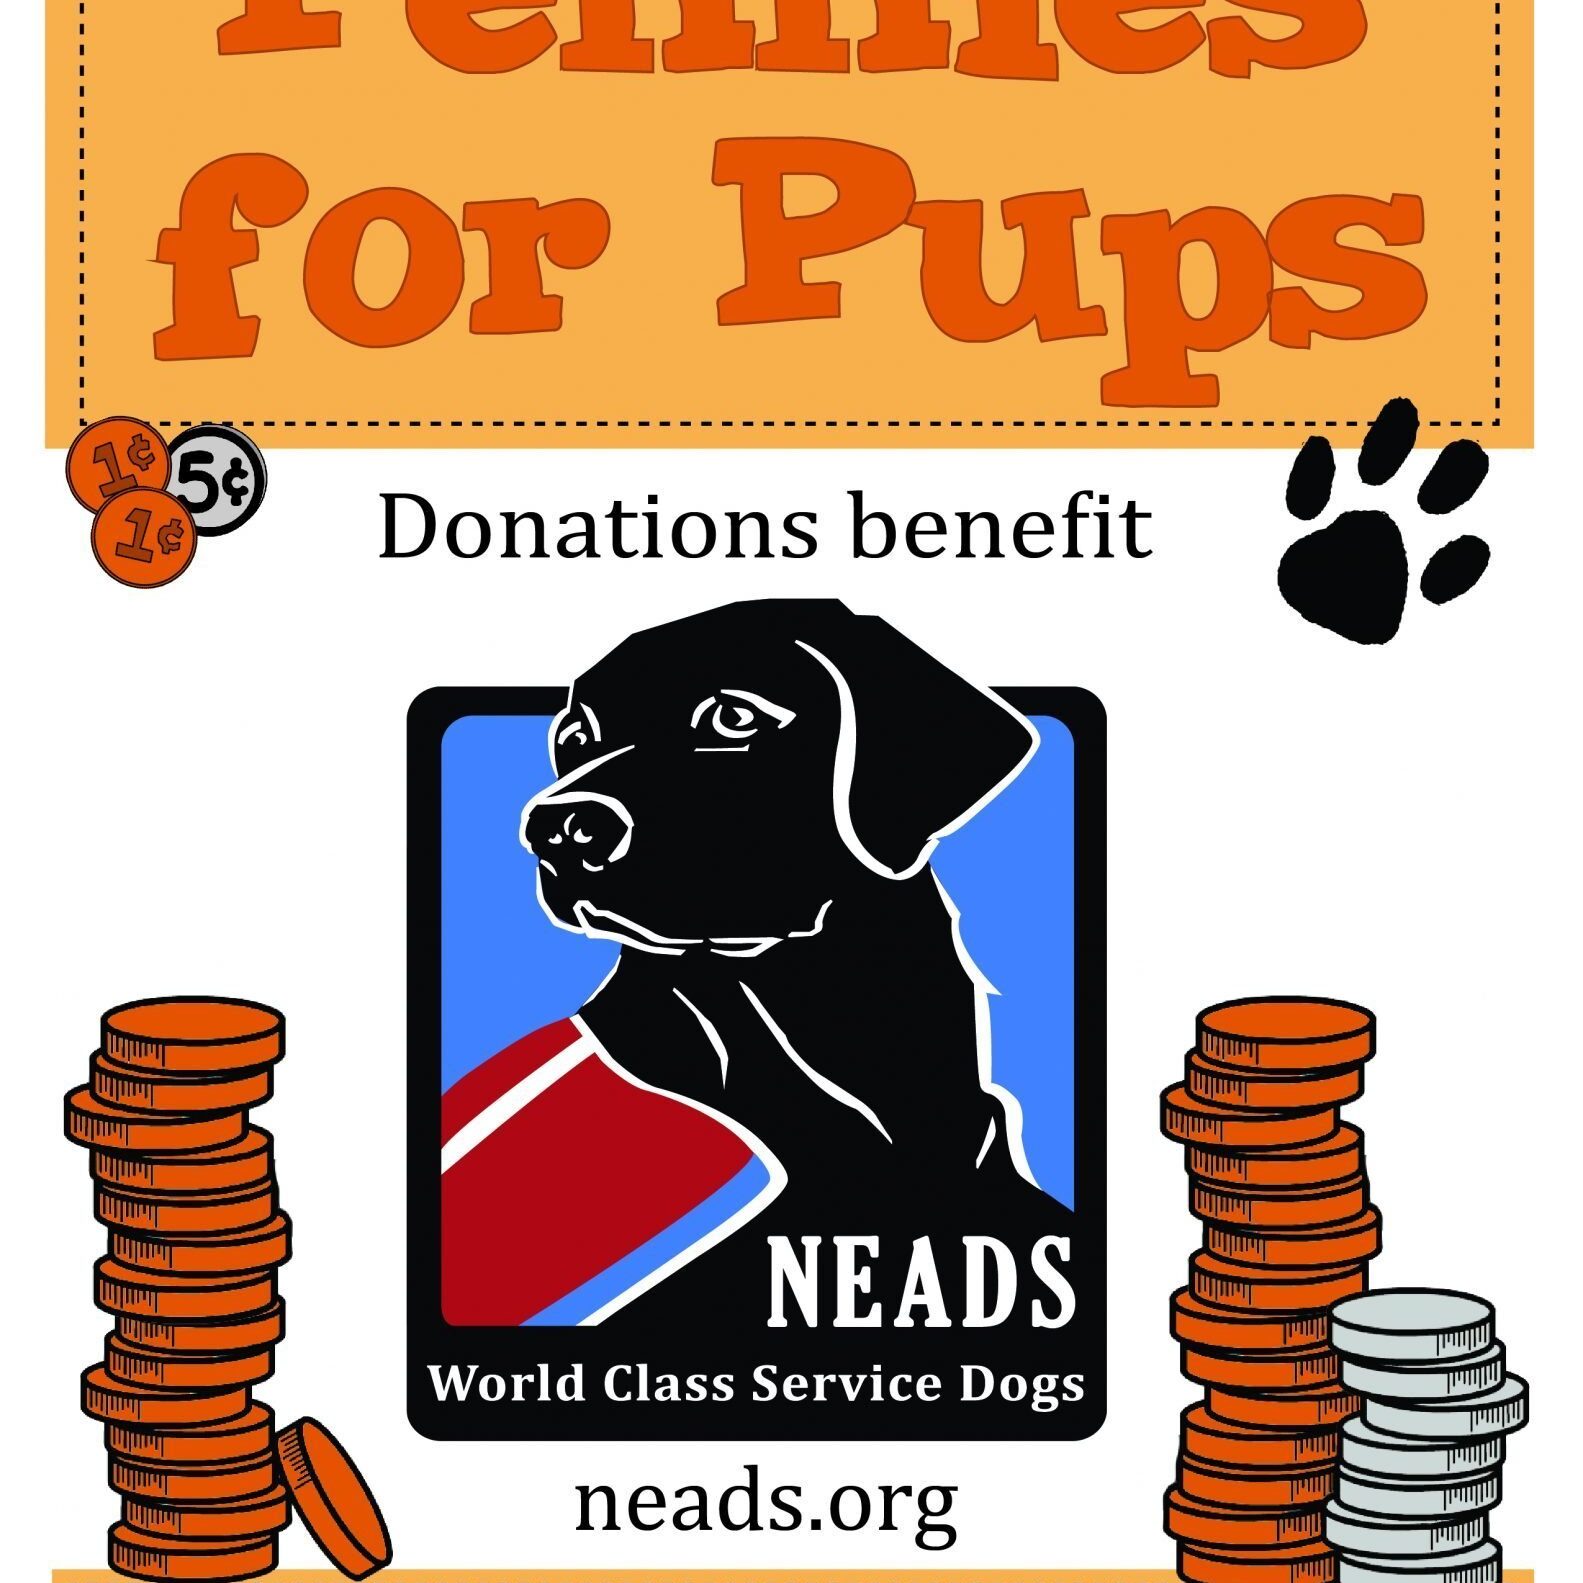 Pennies for Pups 8.5x11 sign